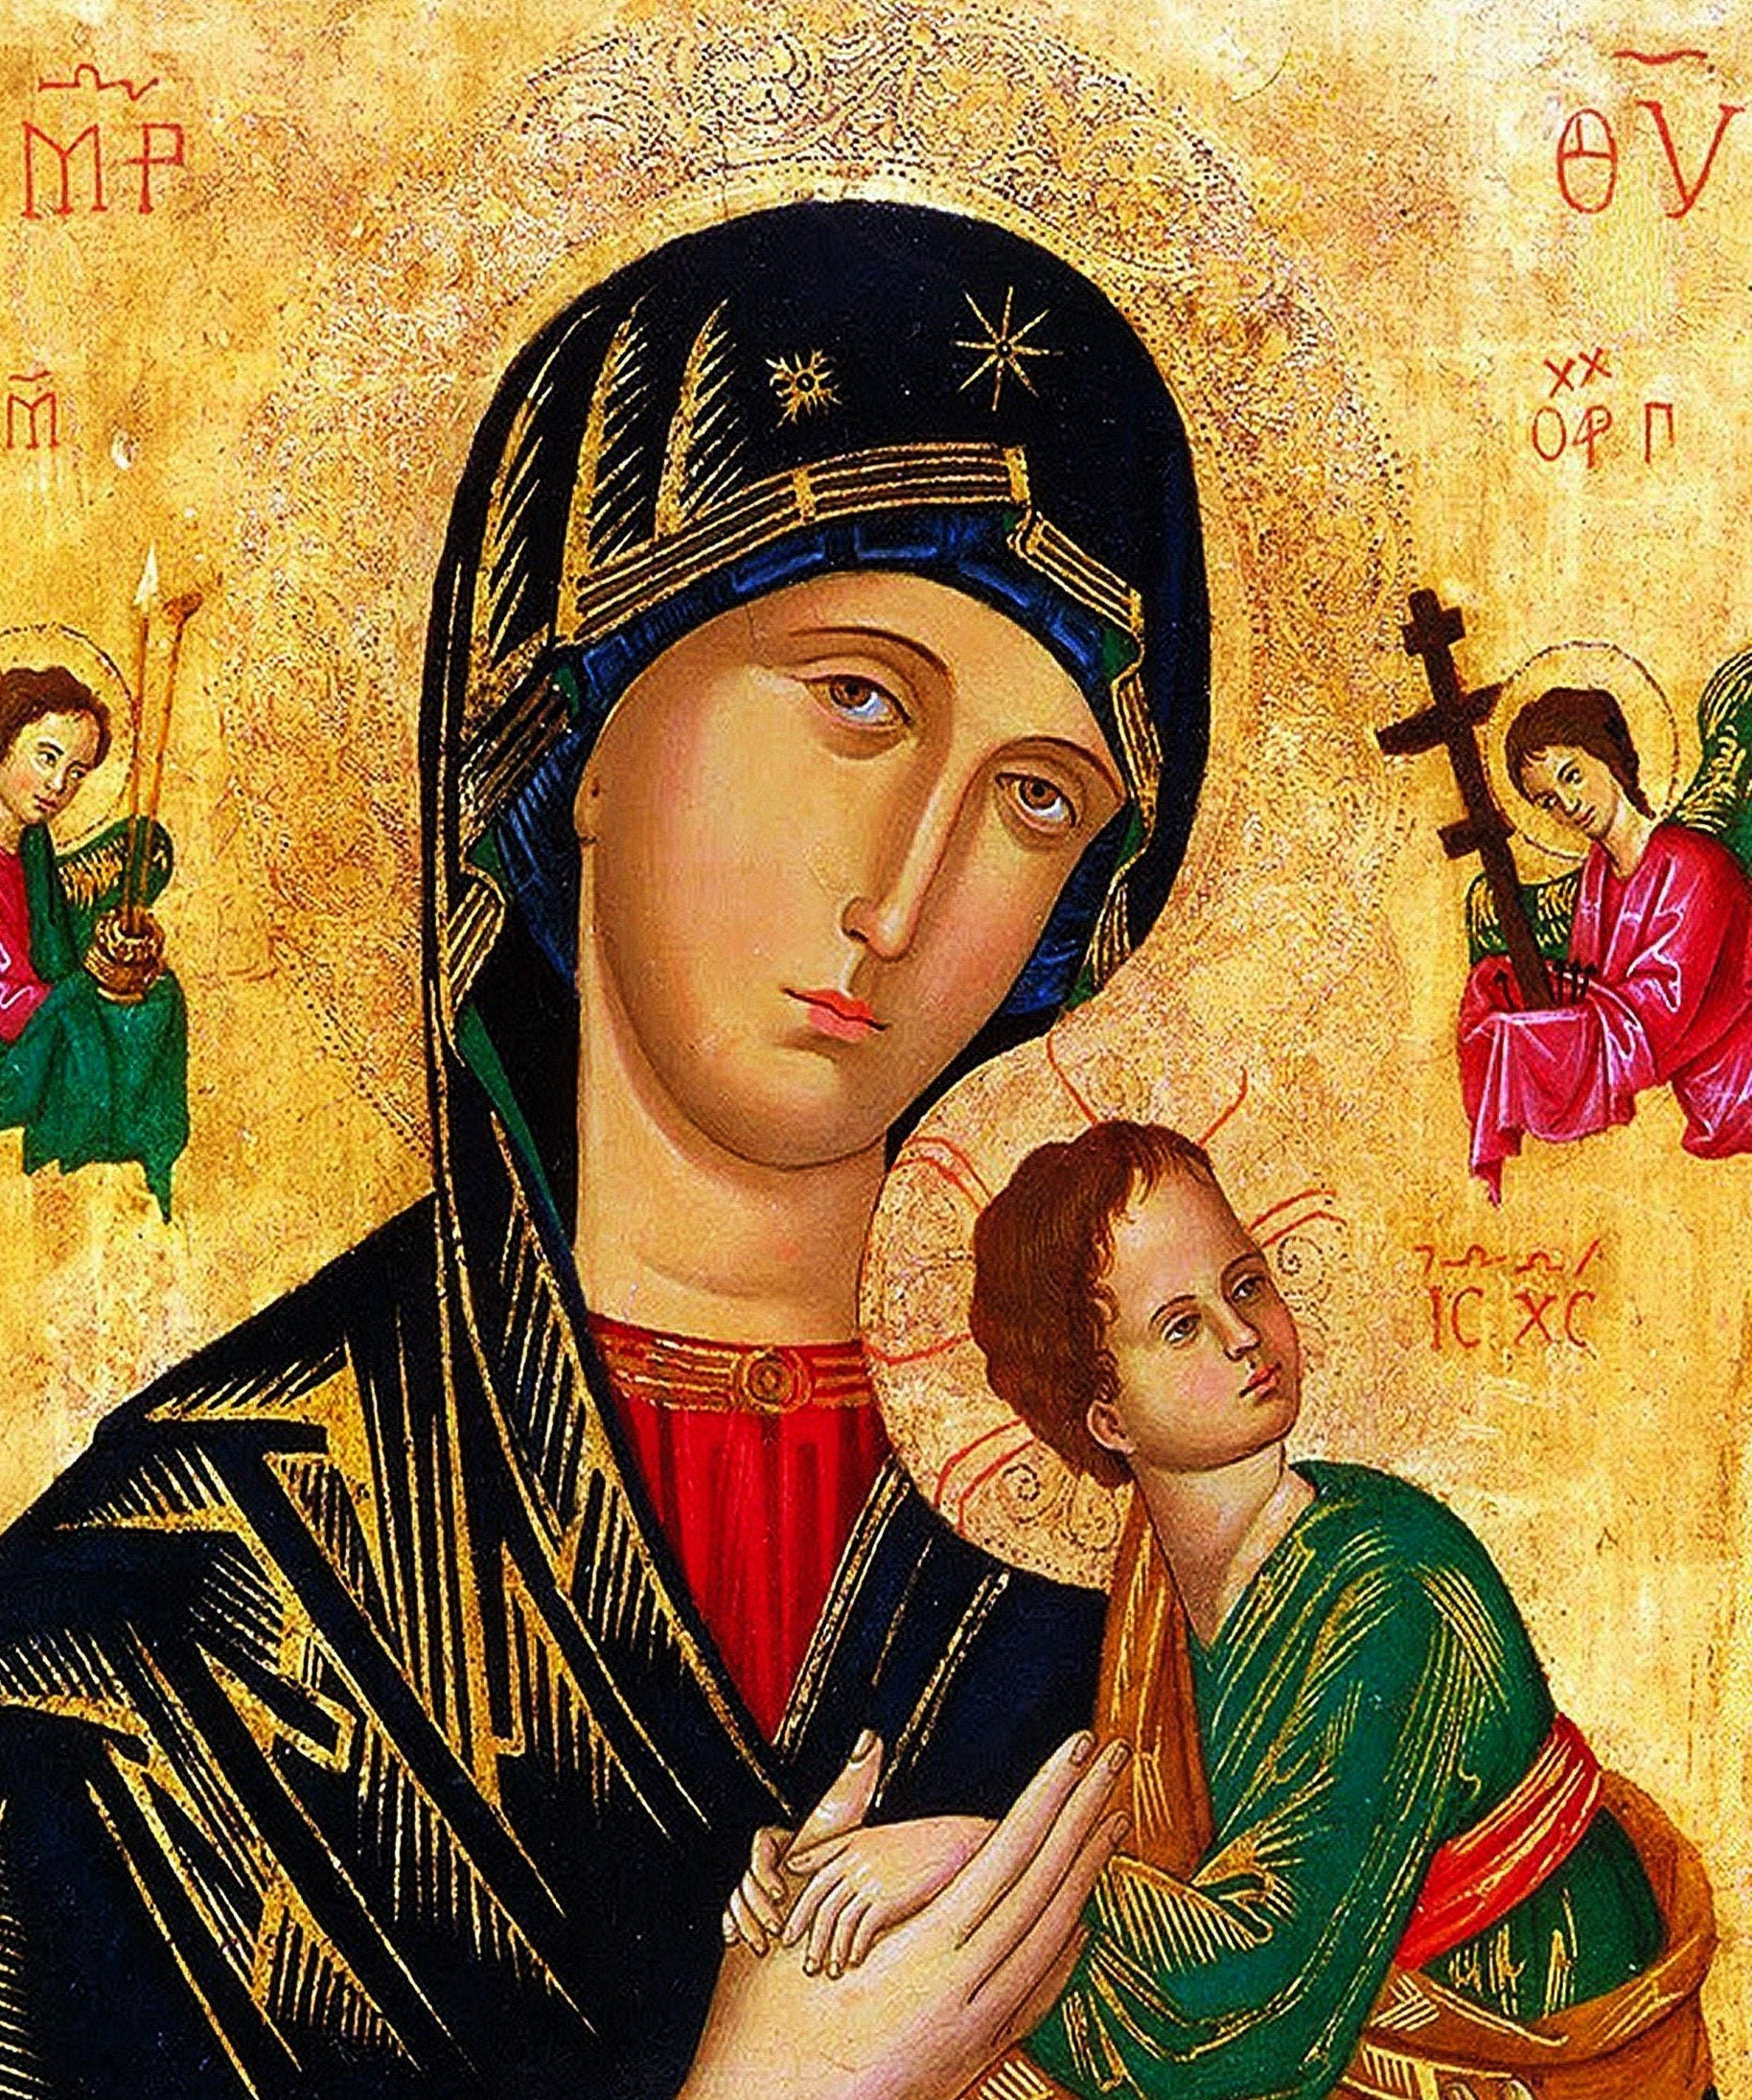 Our Lady of Perpetual Help icon, Handmade Greek Orthodox Icon of Virgin Mary, Mother of God Byzantine art wall hanging plaque TheHolyArt